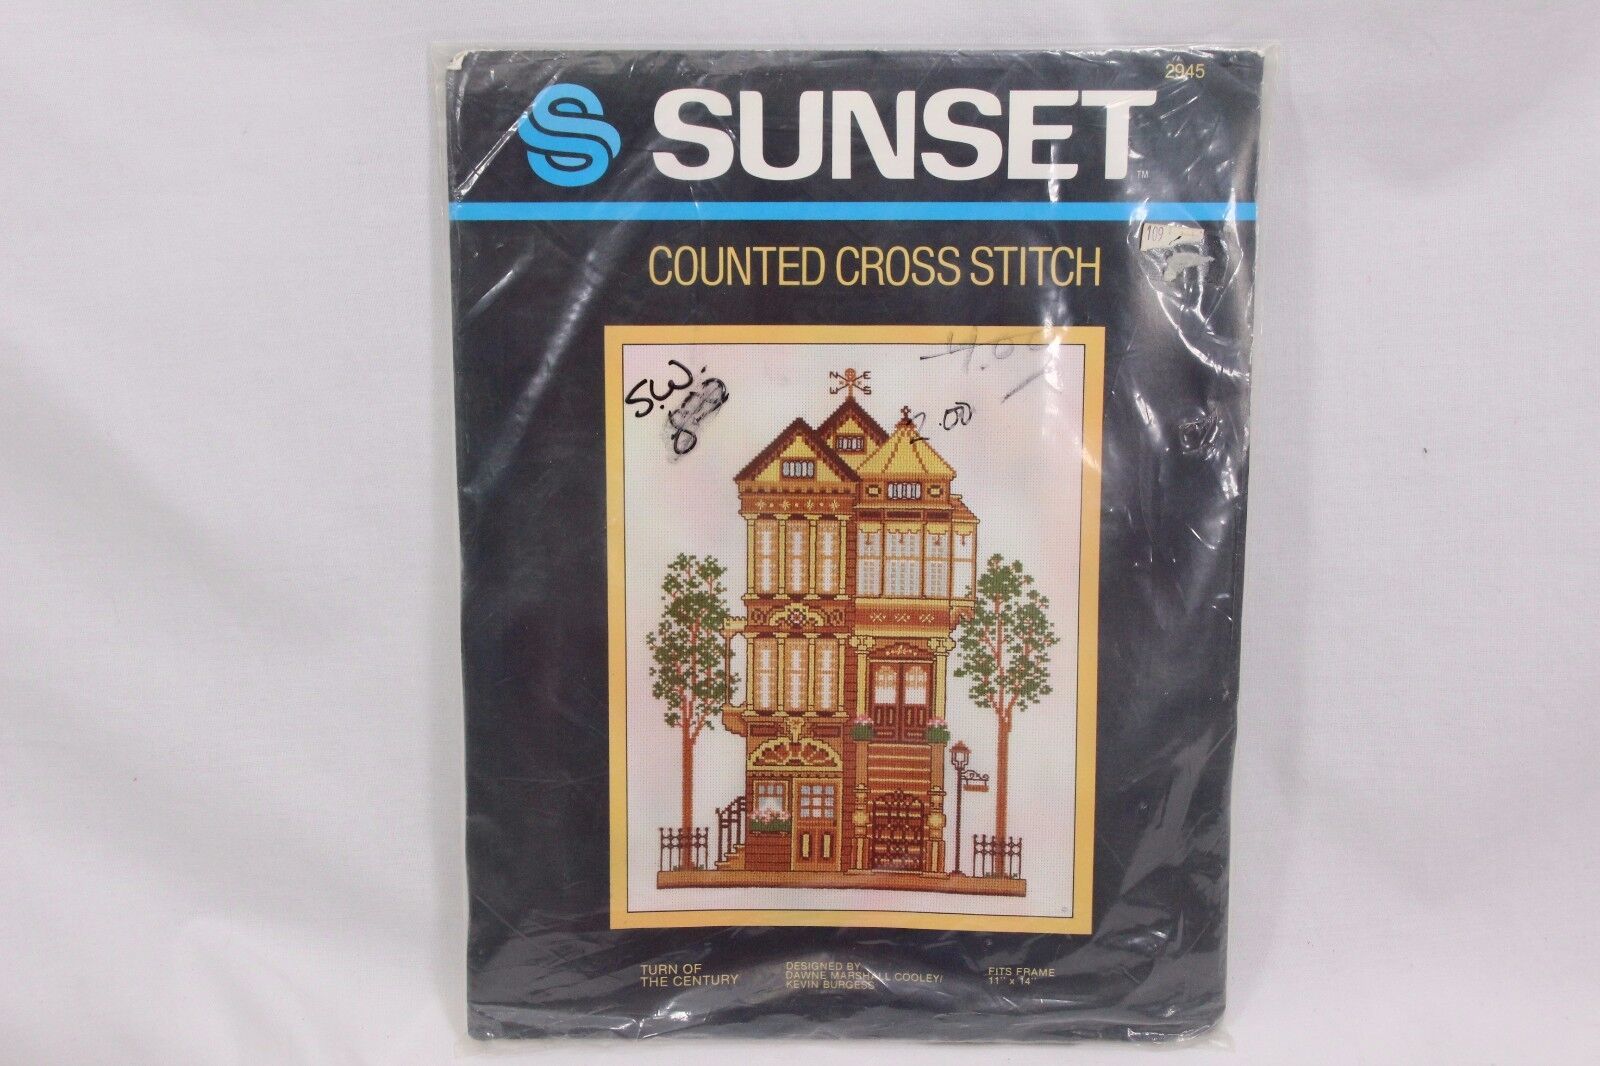 Sunset Counted Cross Stitch 1983 Turn of the Century 2945 - $32.33